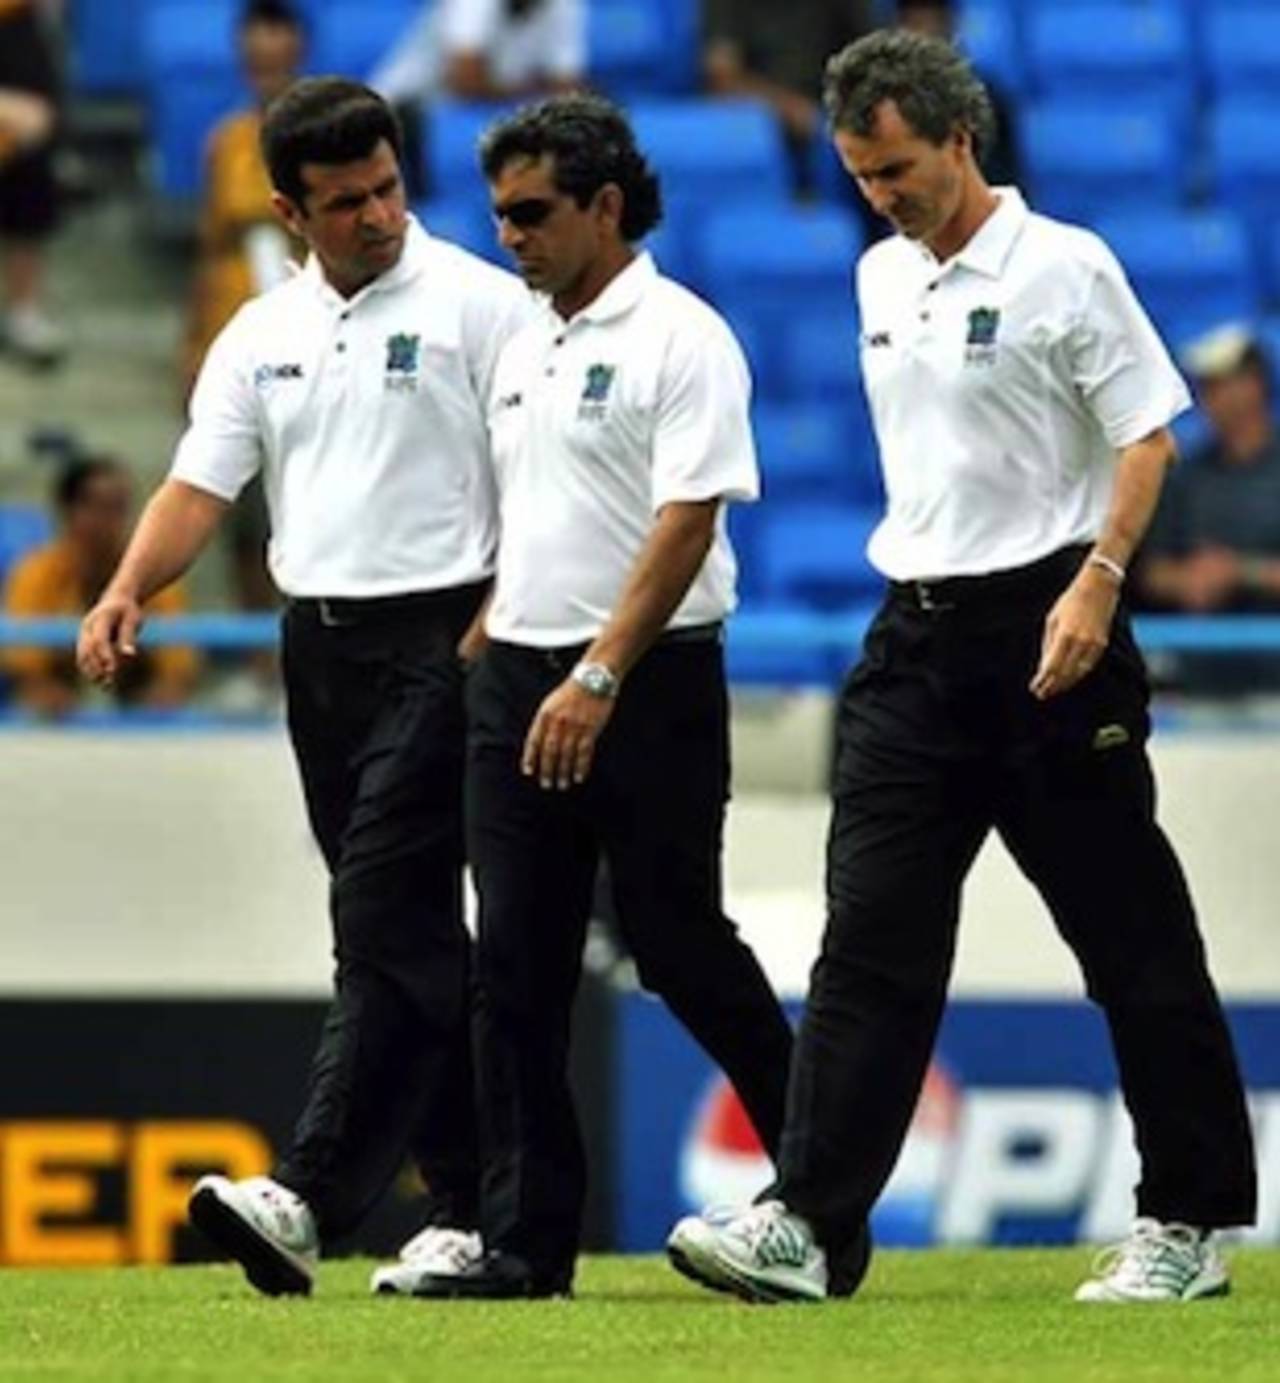 Asad Rauf (middle) and Billy Bowden (right) have been dropped from the Elite Panel of umpires&nbsp;&nbsp;&bull;&nbsp;&nbsp;AFP